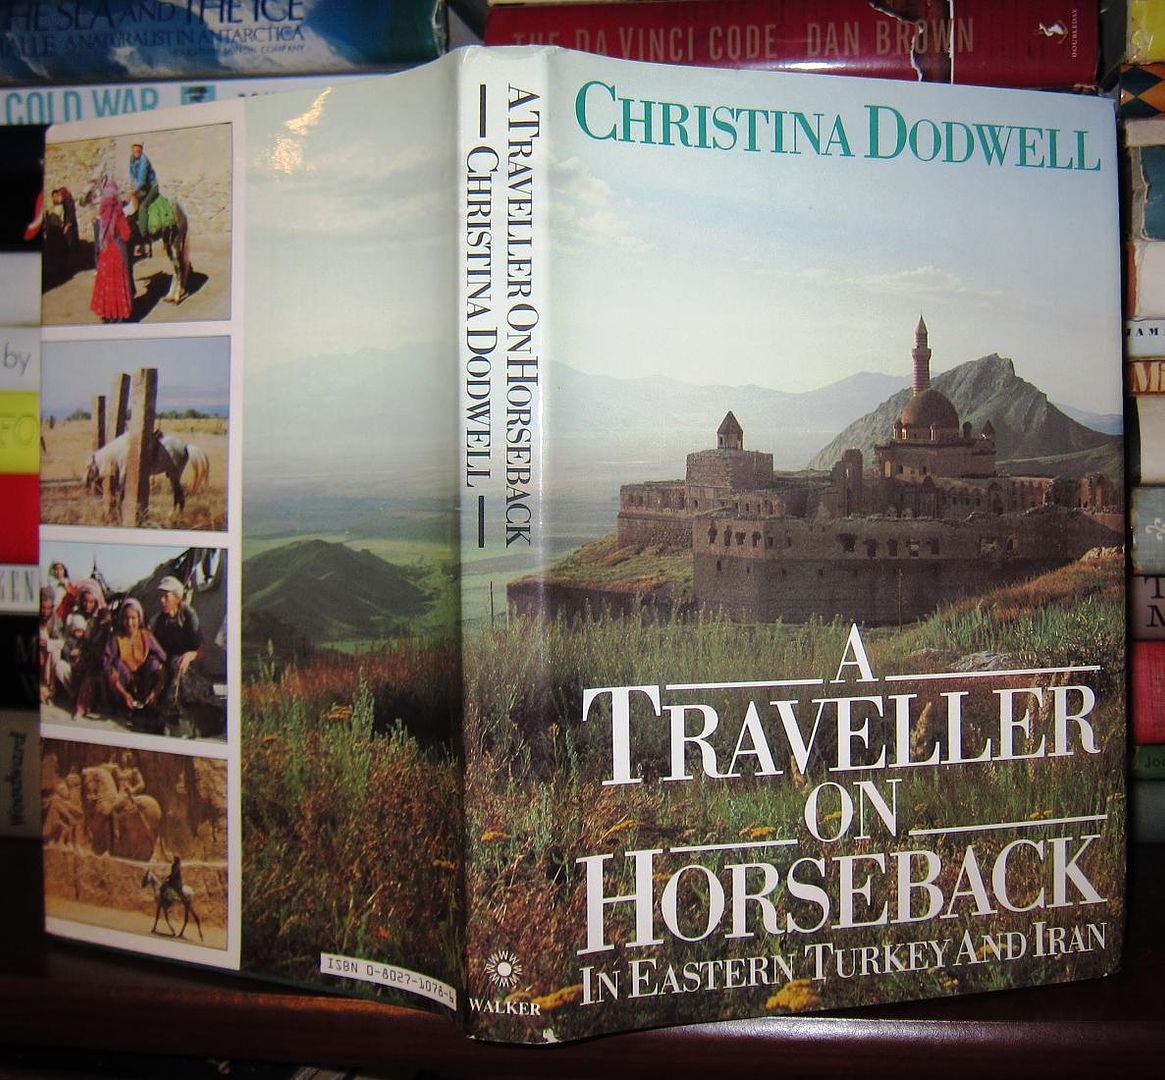 DODWELL, CHRISTINA - A Traveller on Horseback in Eastern Turkey and Iran